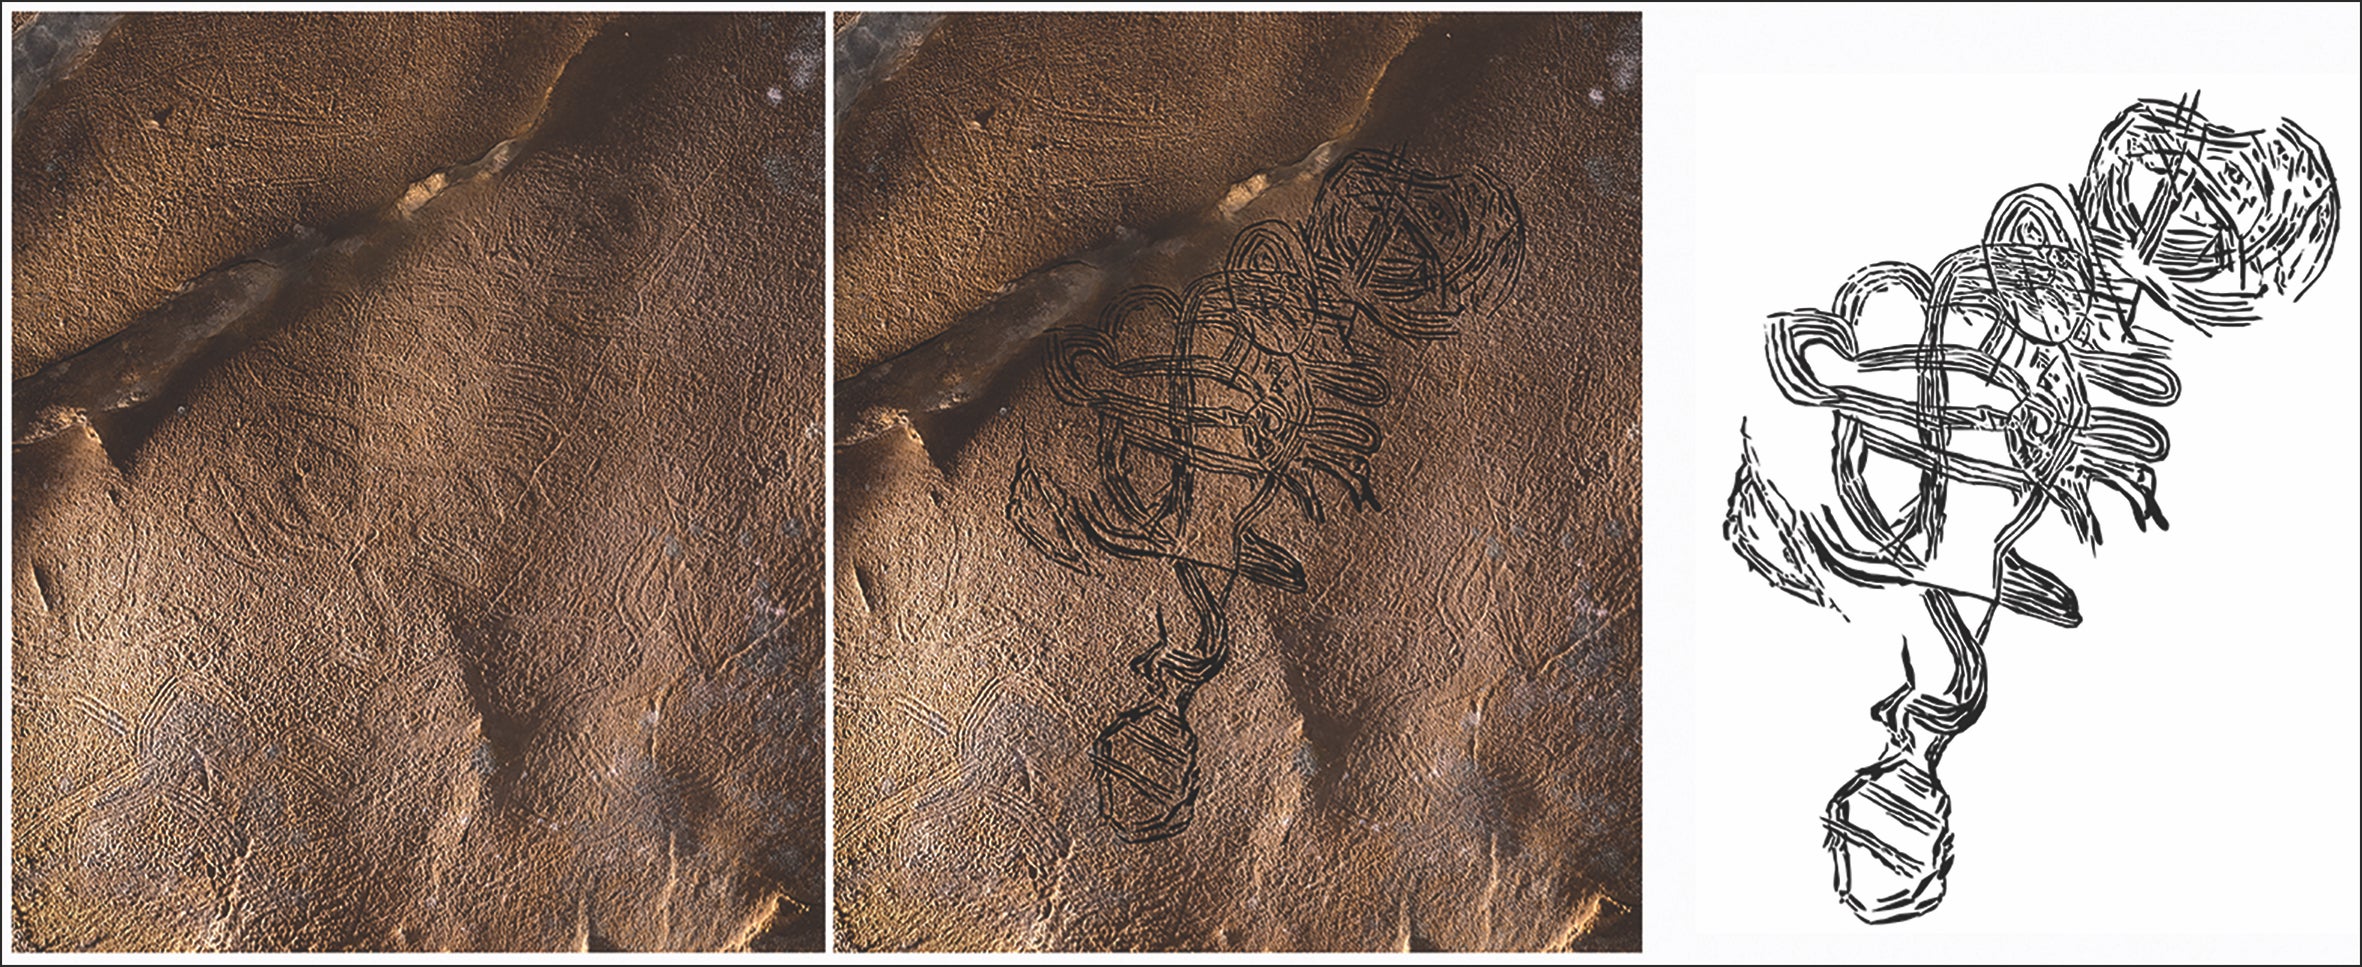 A swirling glyph possibly depicting a rattlesnake. (Graphic: Photograph by S. Alvarez; illustration by J. Simek.)